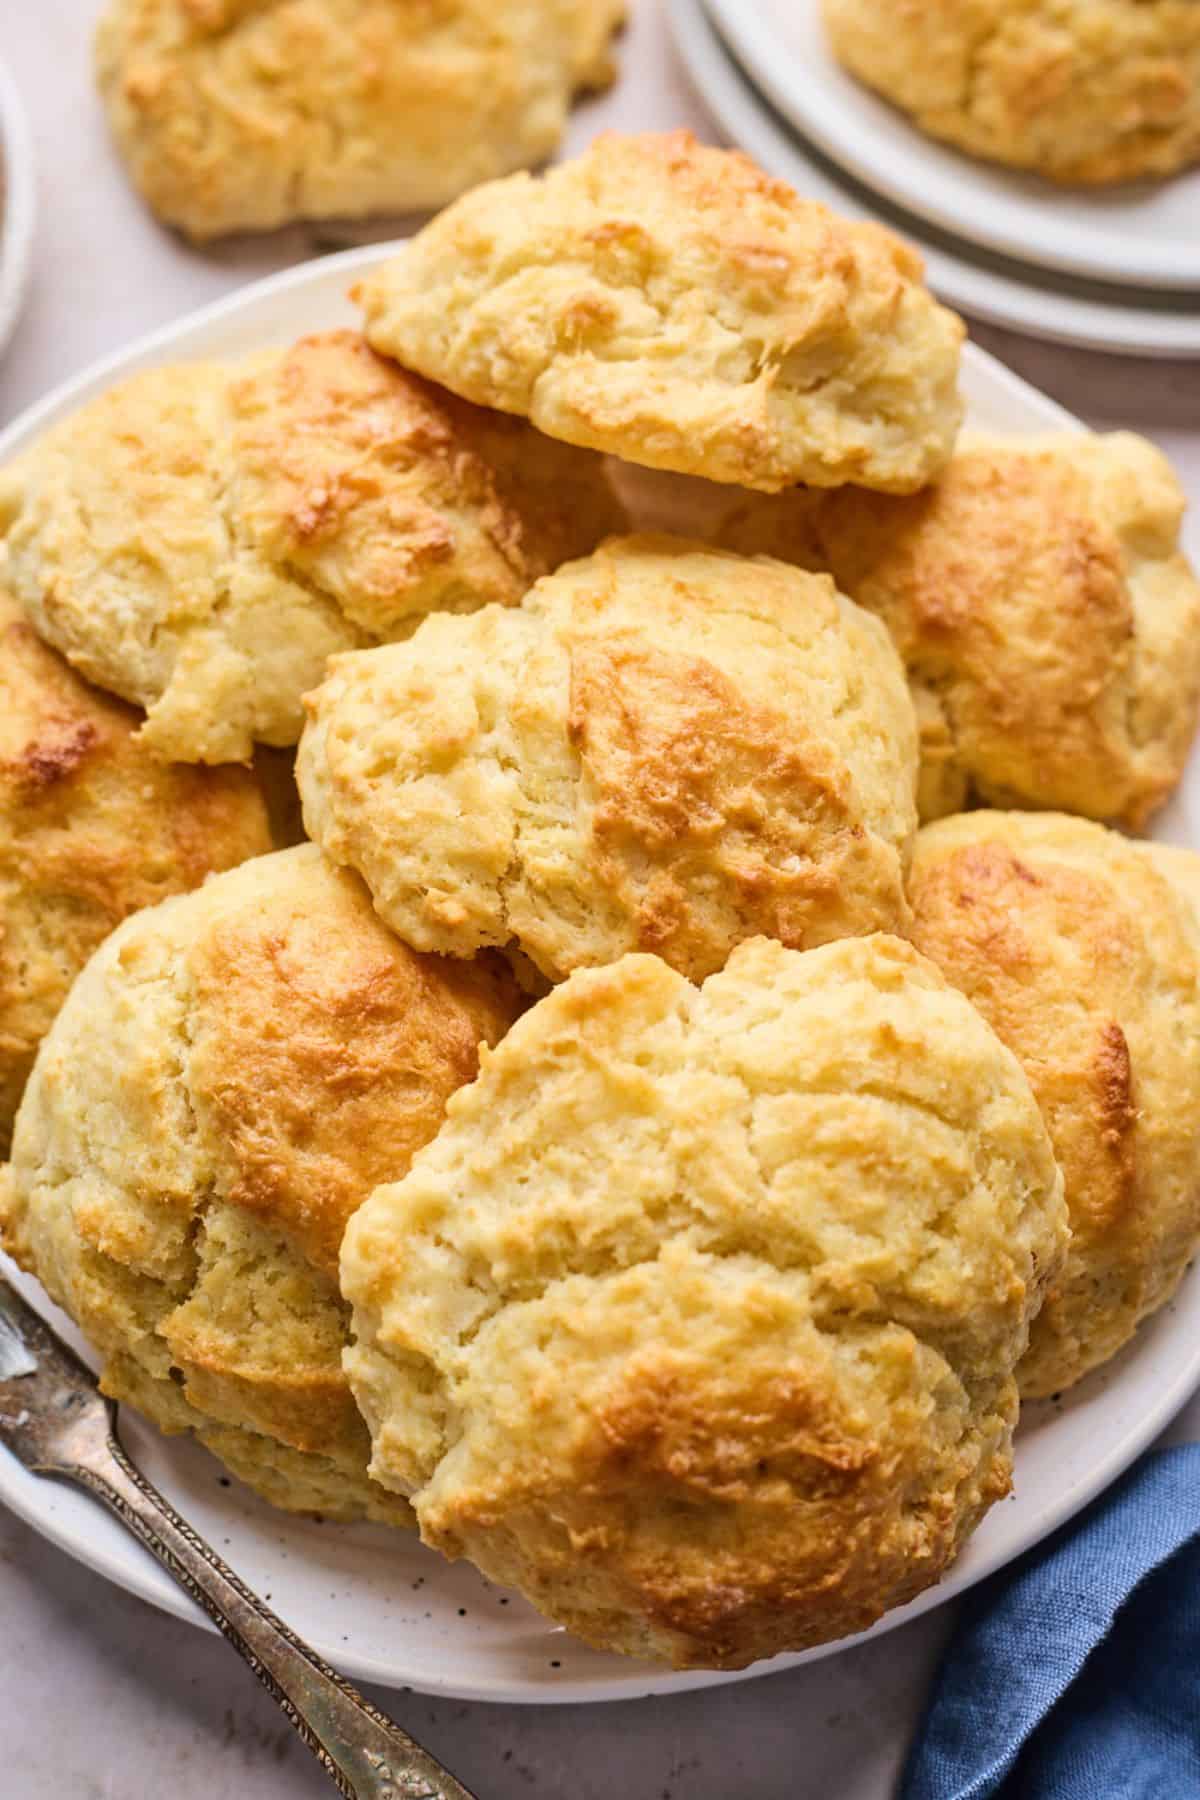 Pile of drop biscuits on a plate